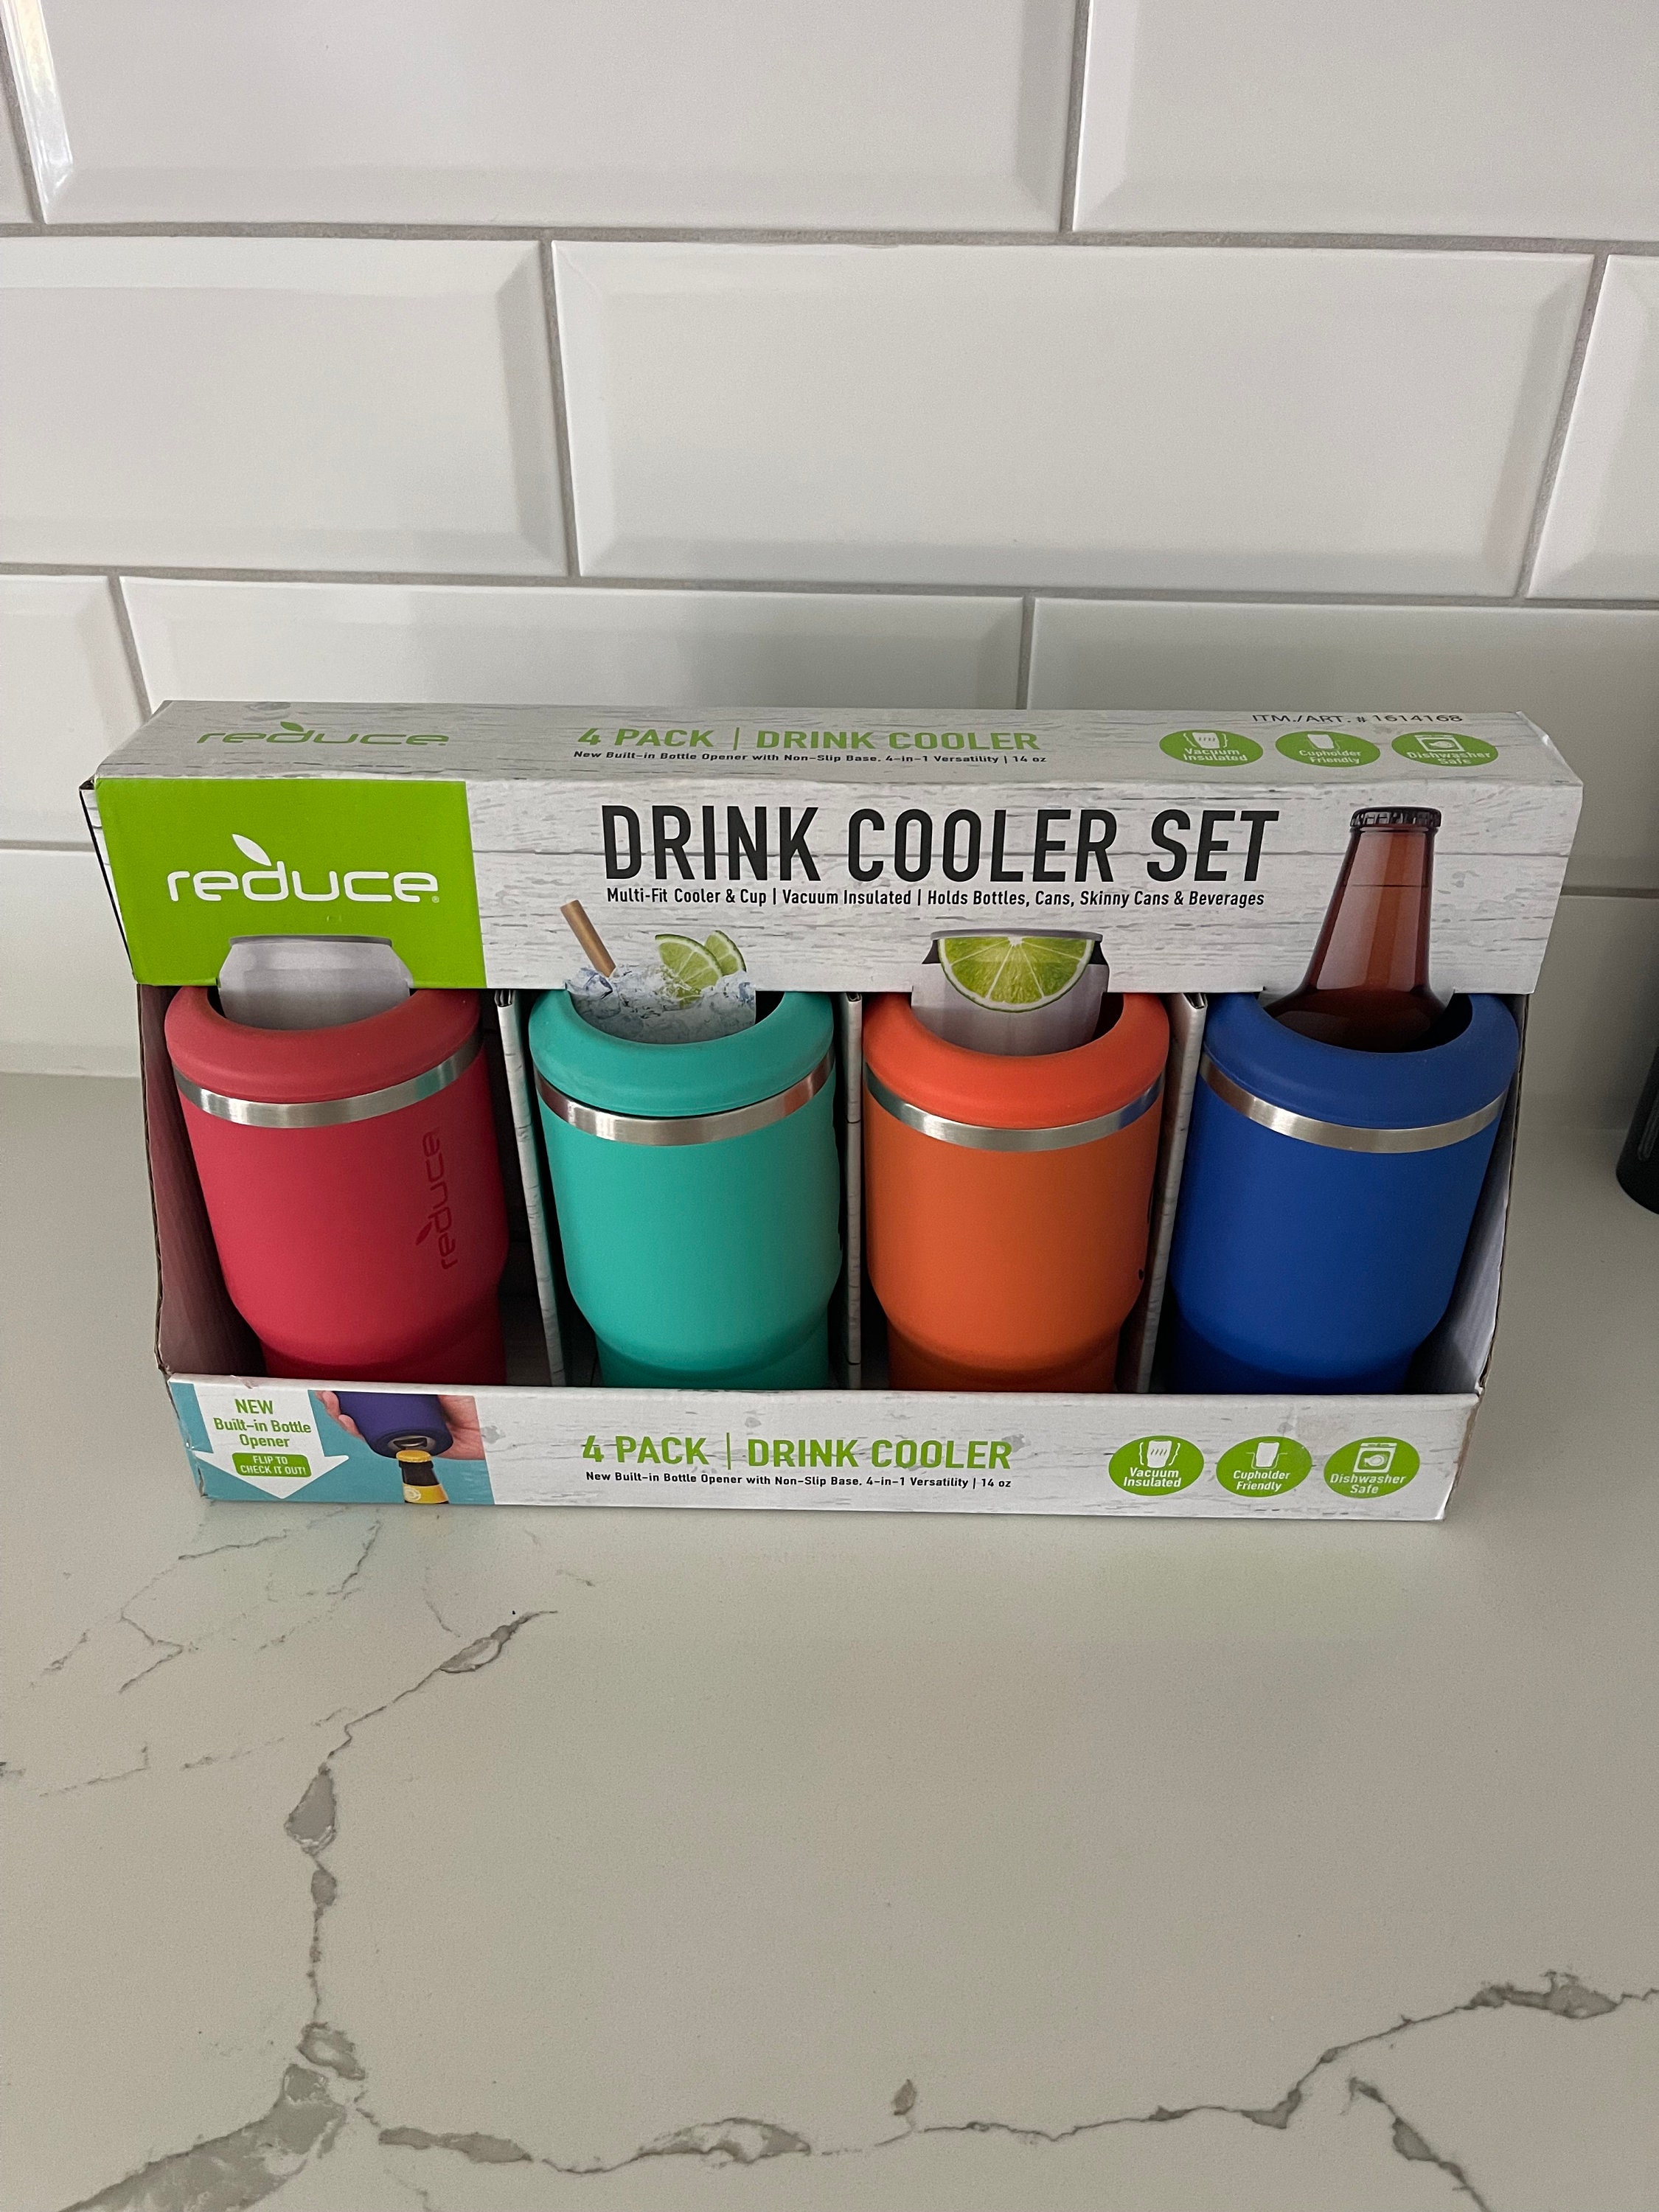 Reduce Bottle & Can Cooler, 4-pack